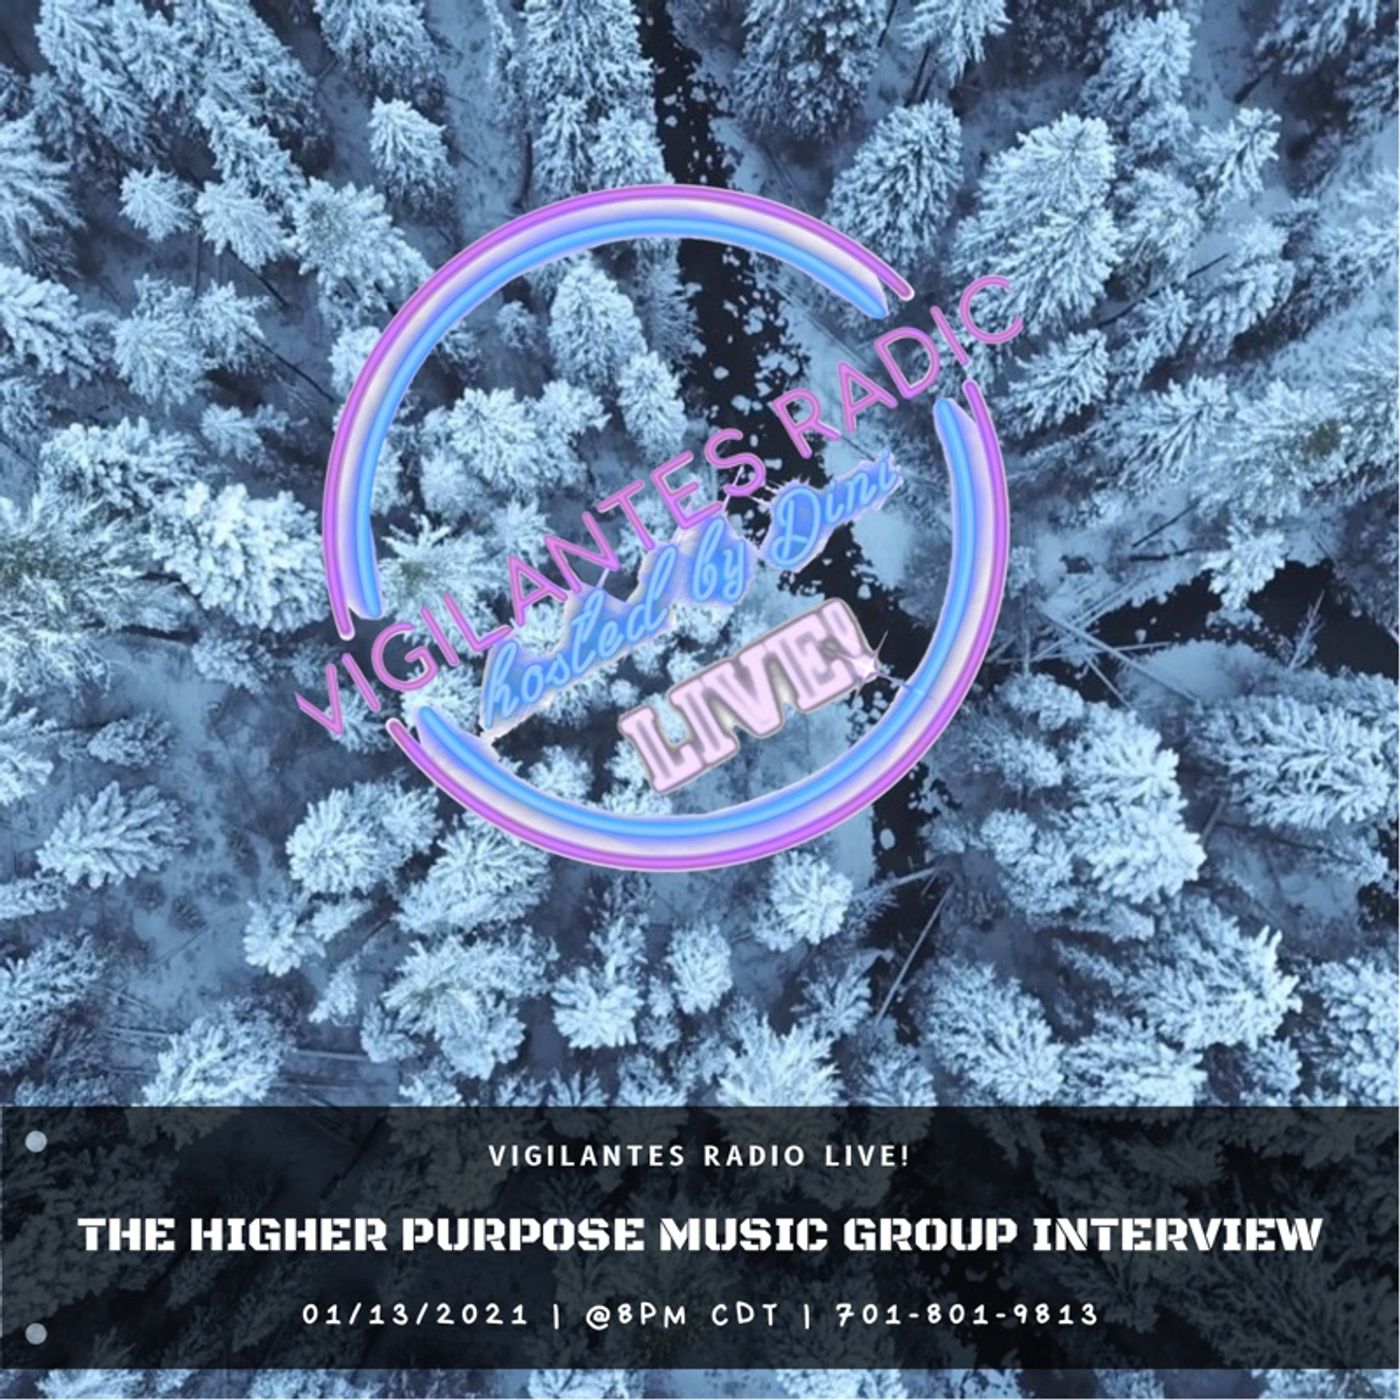 The Higher Purpose Music Group Interview. Image